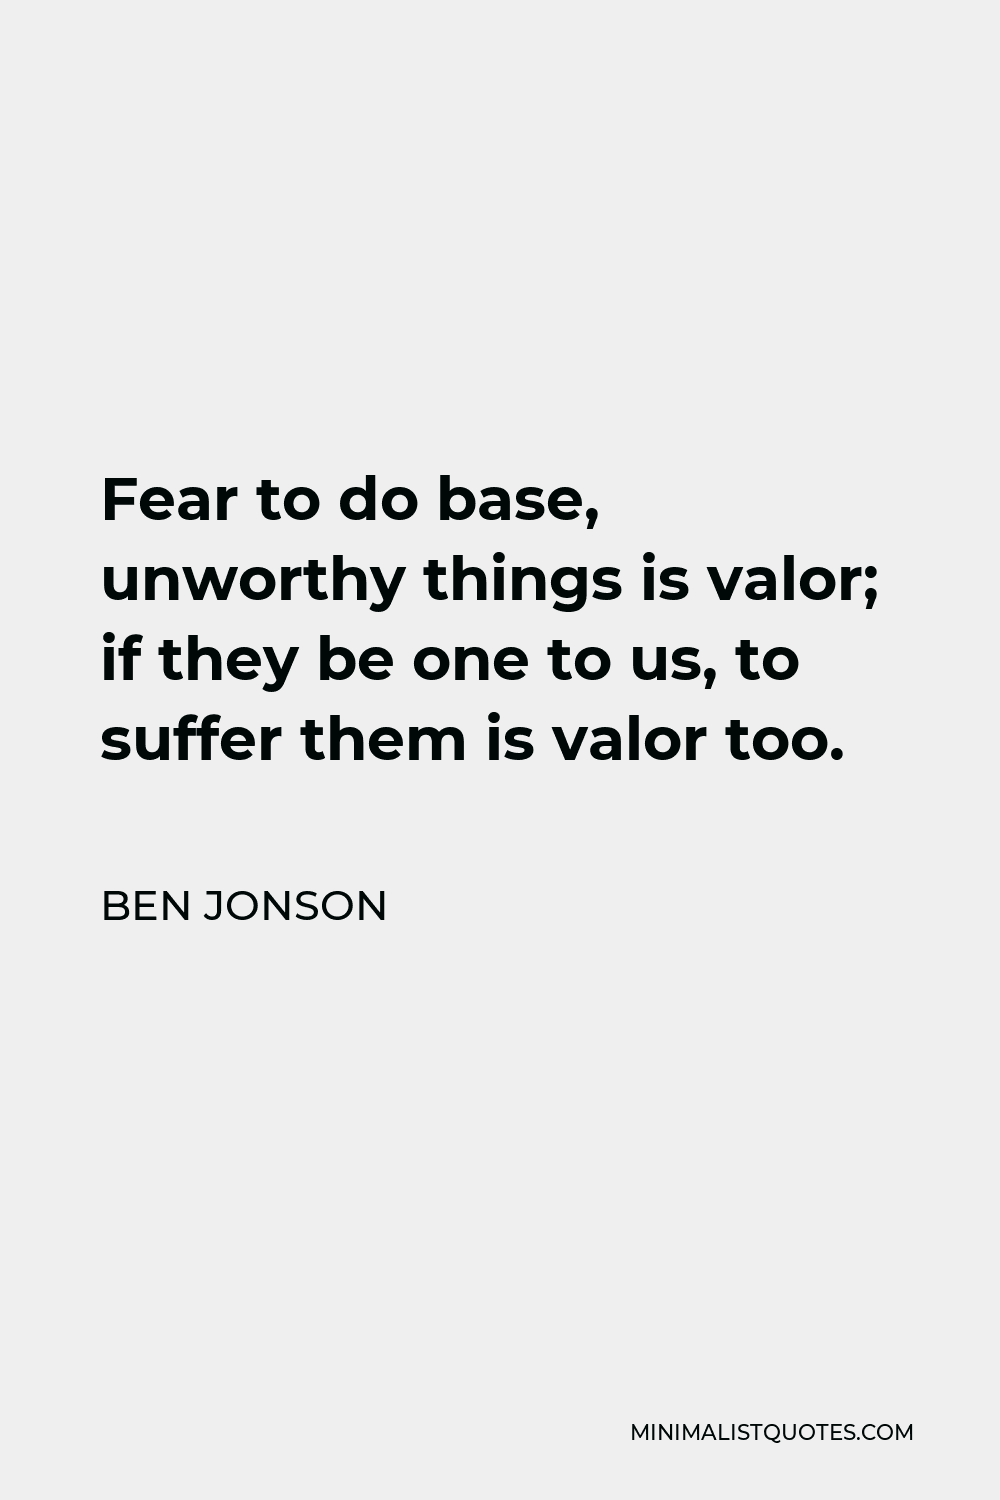 Ben Jonson Quote - Fear to do base, unworthy things is valor; if they be one to us, to suffer them is valor too.